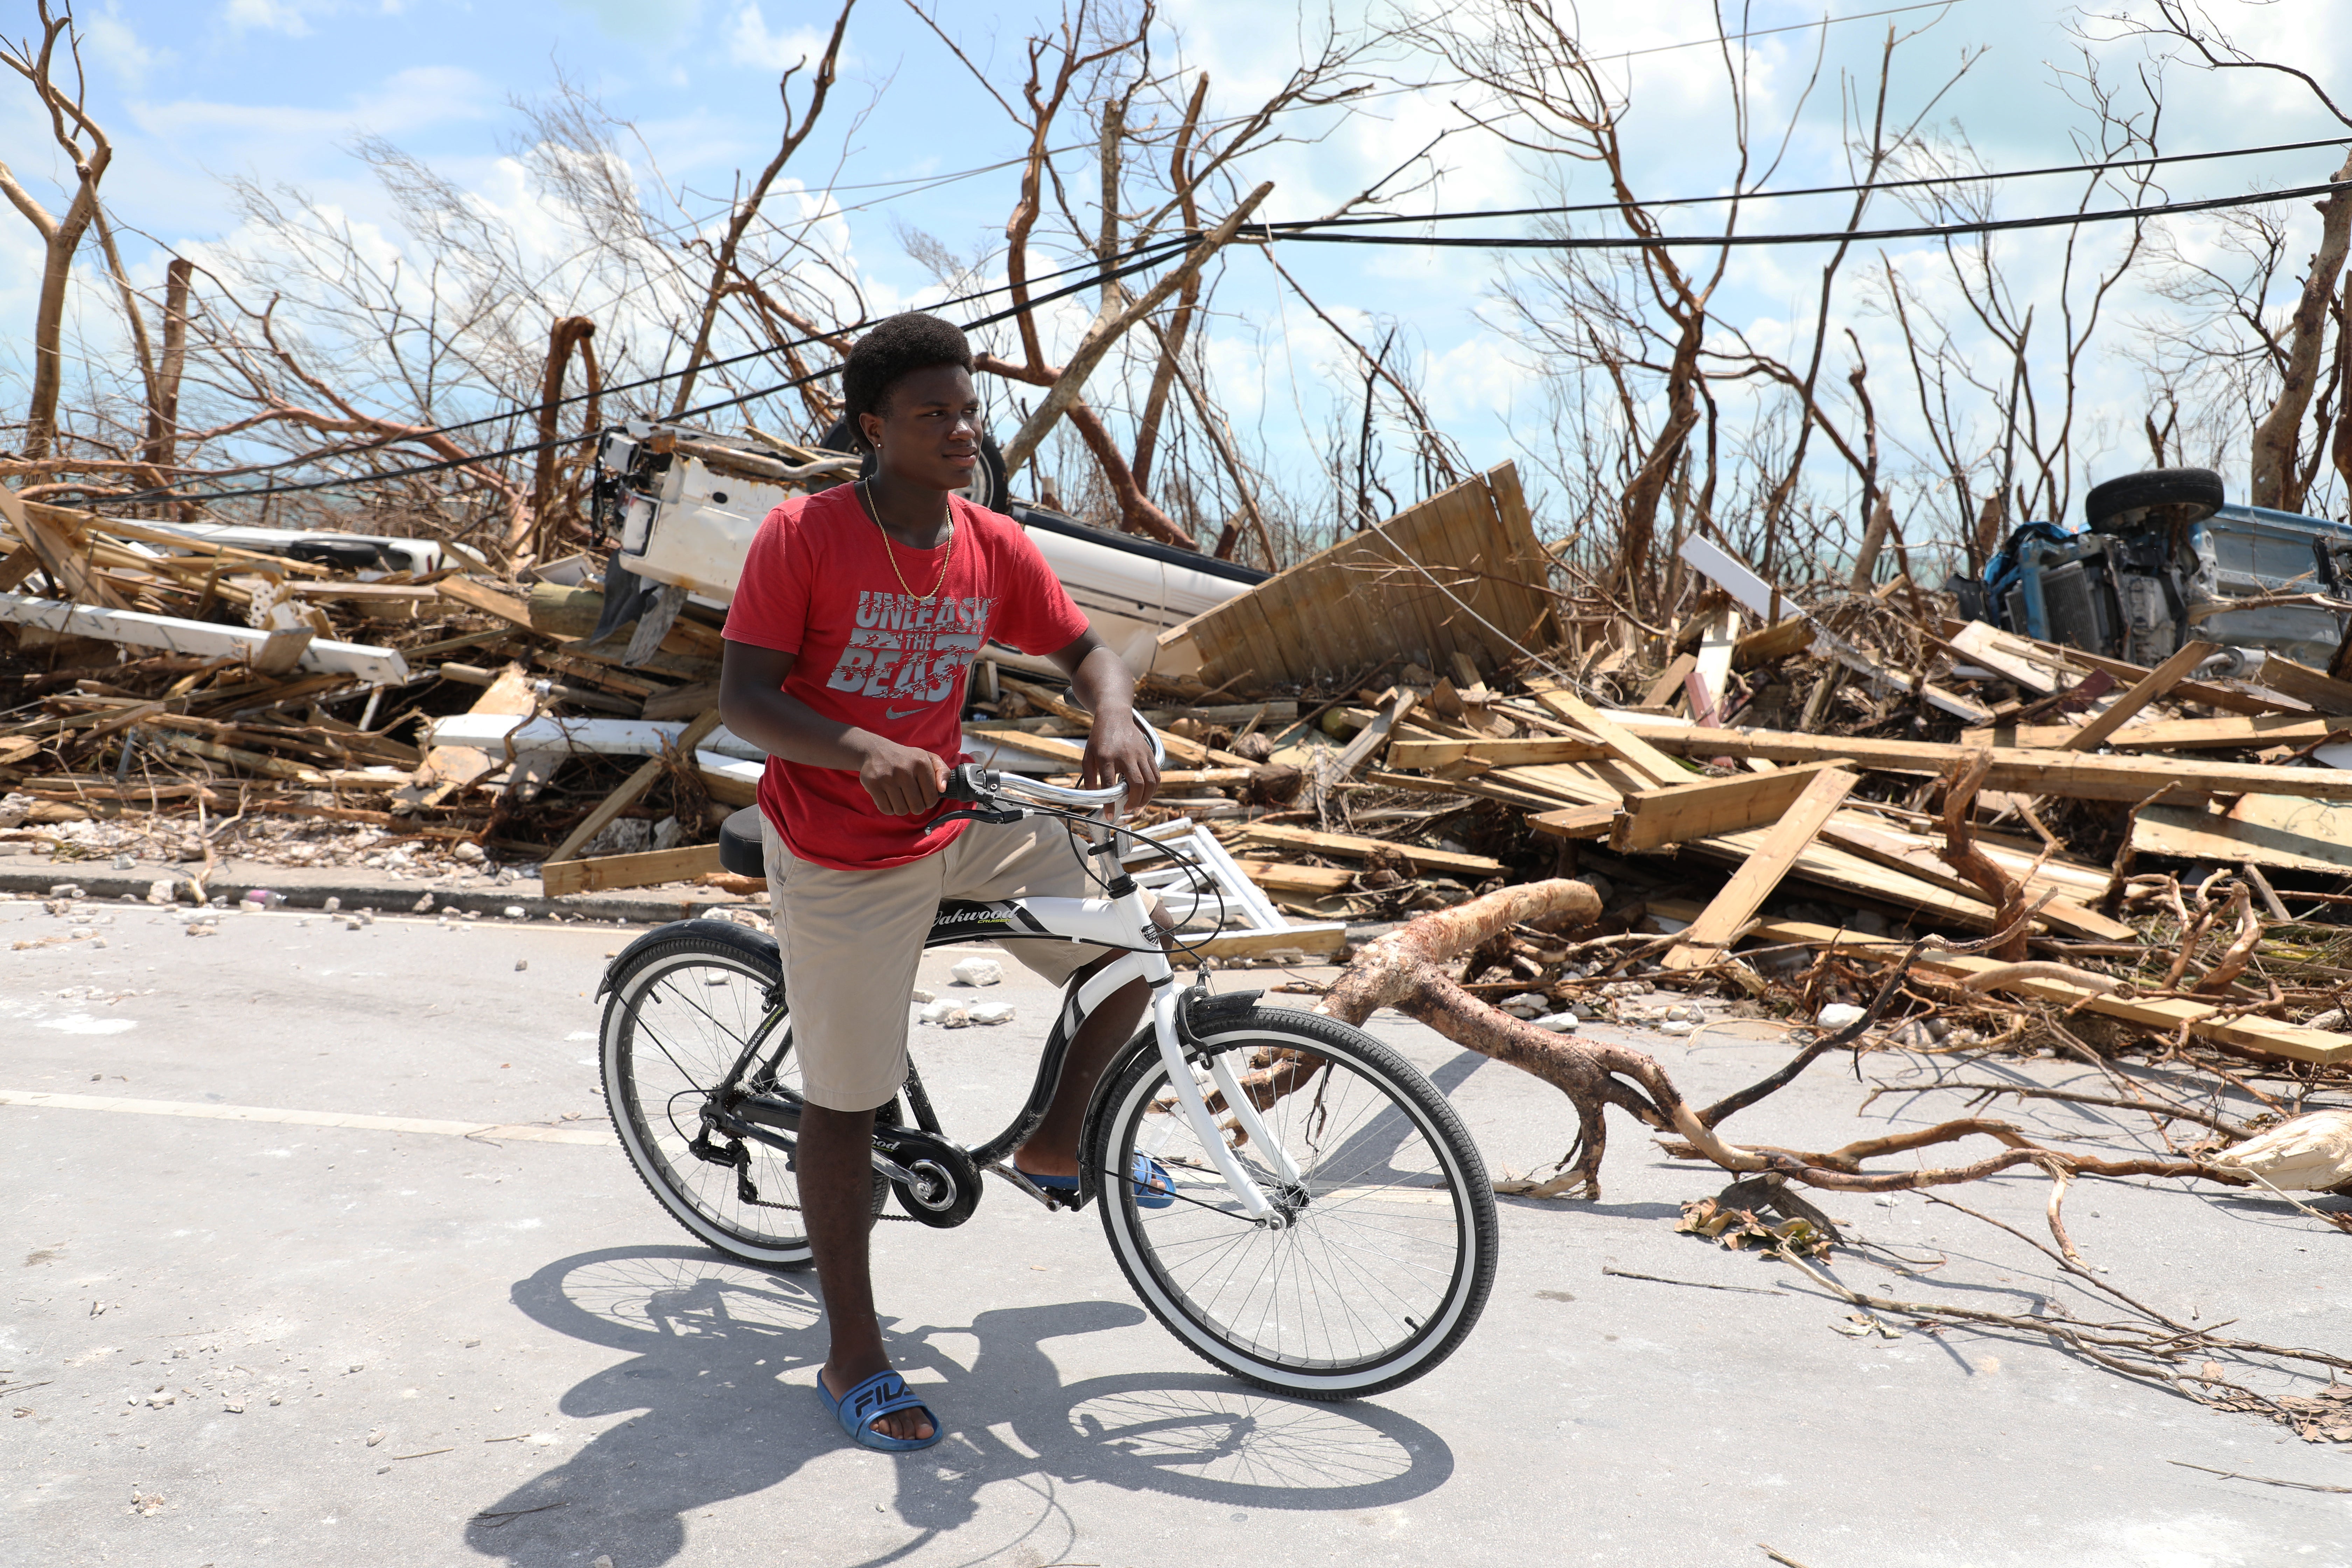 Benson Etienne riding his bicycle around the hurricane-hit Marsh Harbour, on Abaco Island in the Bahamas (Manuel Moreno Gonzalez/Unicef)